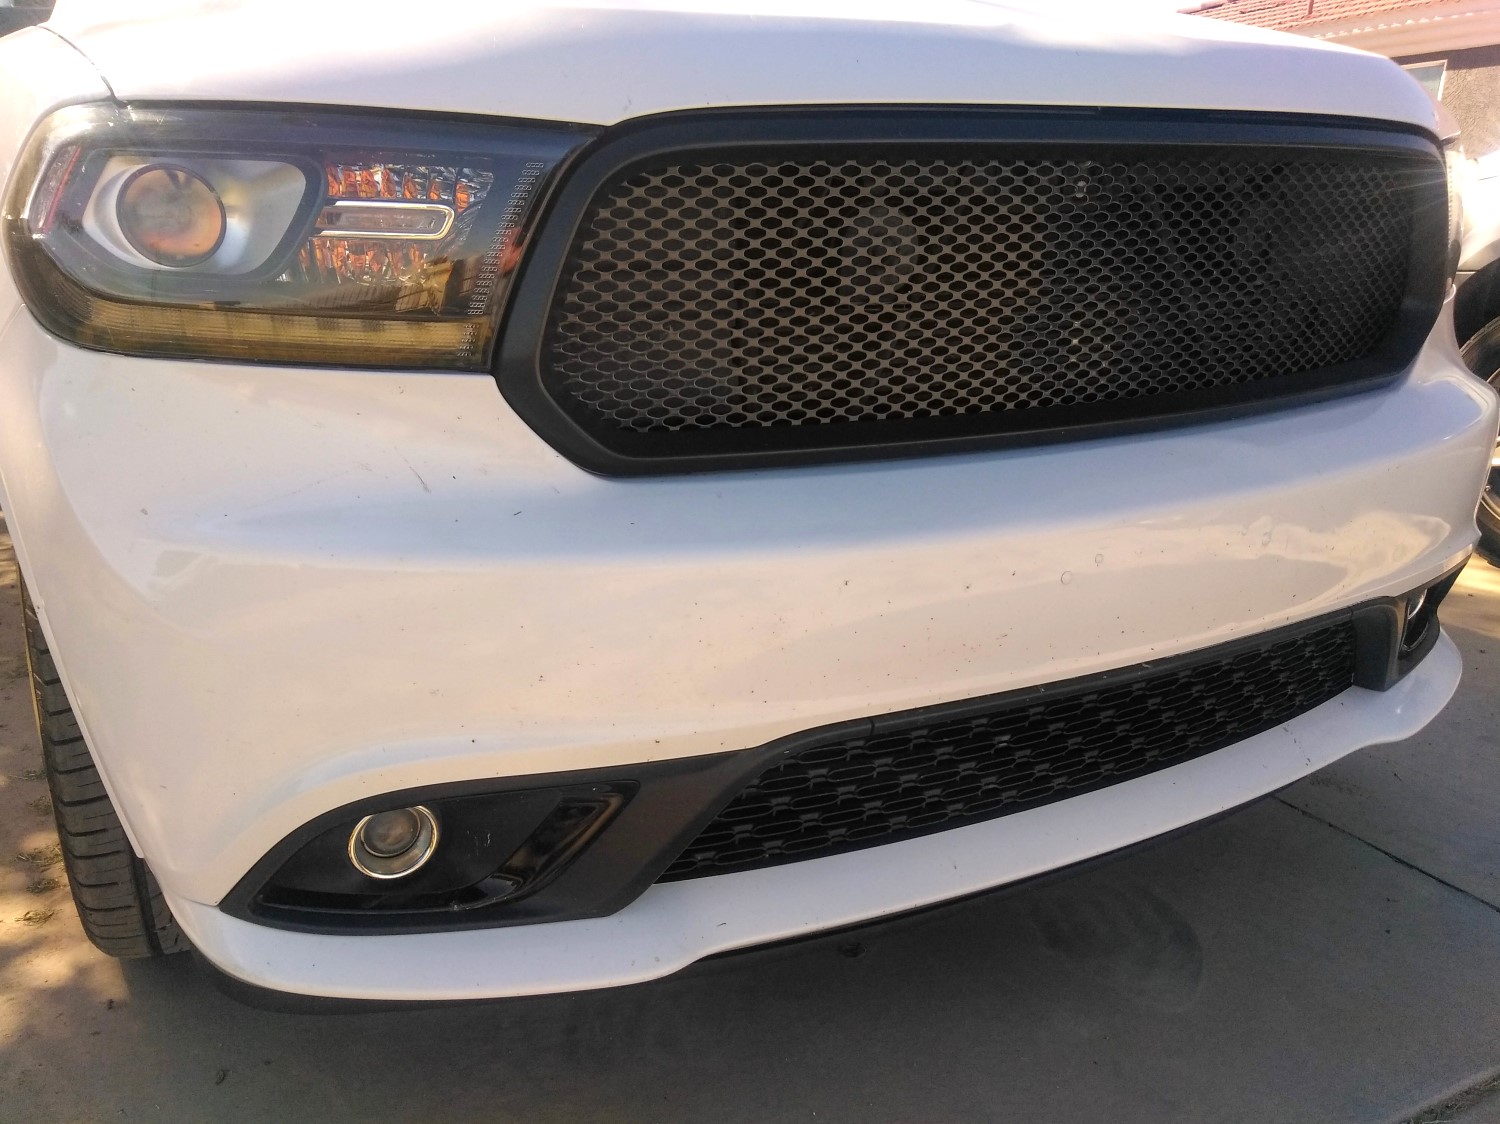 Upgrade Your Dodge Durango's Front End with a Custom All-Black Grille